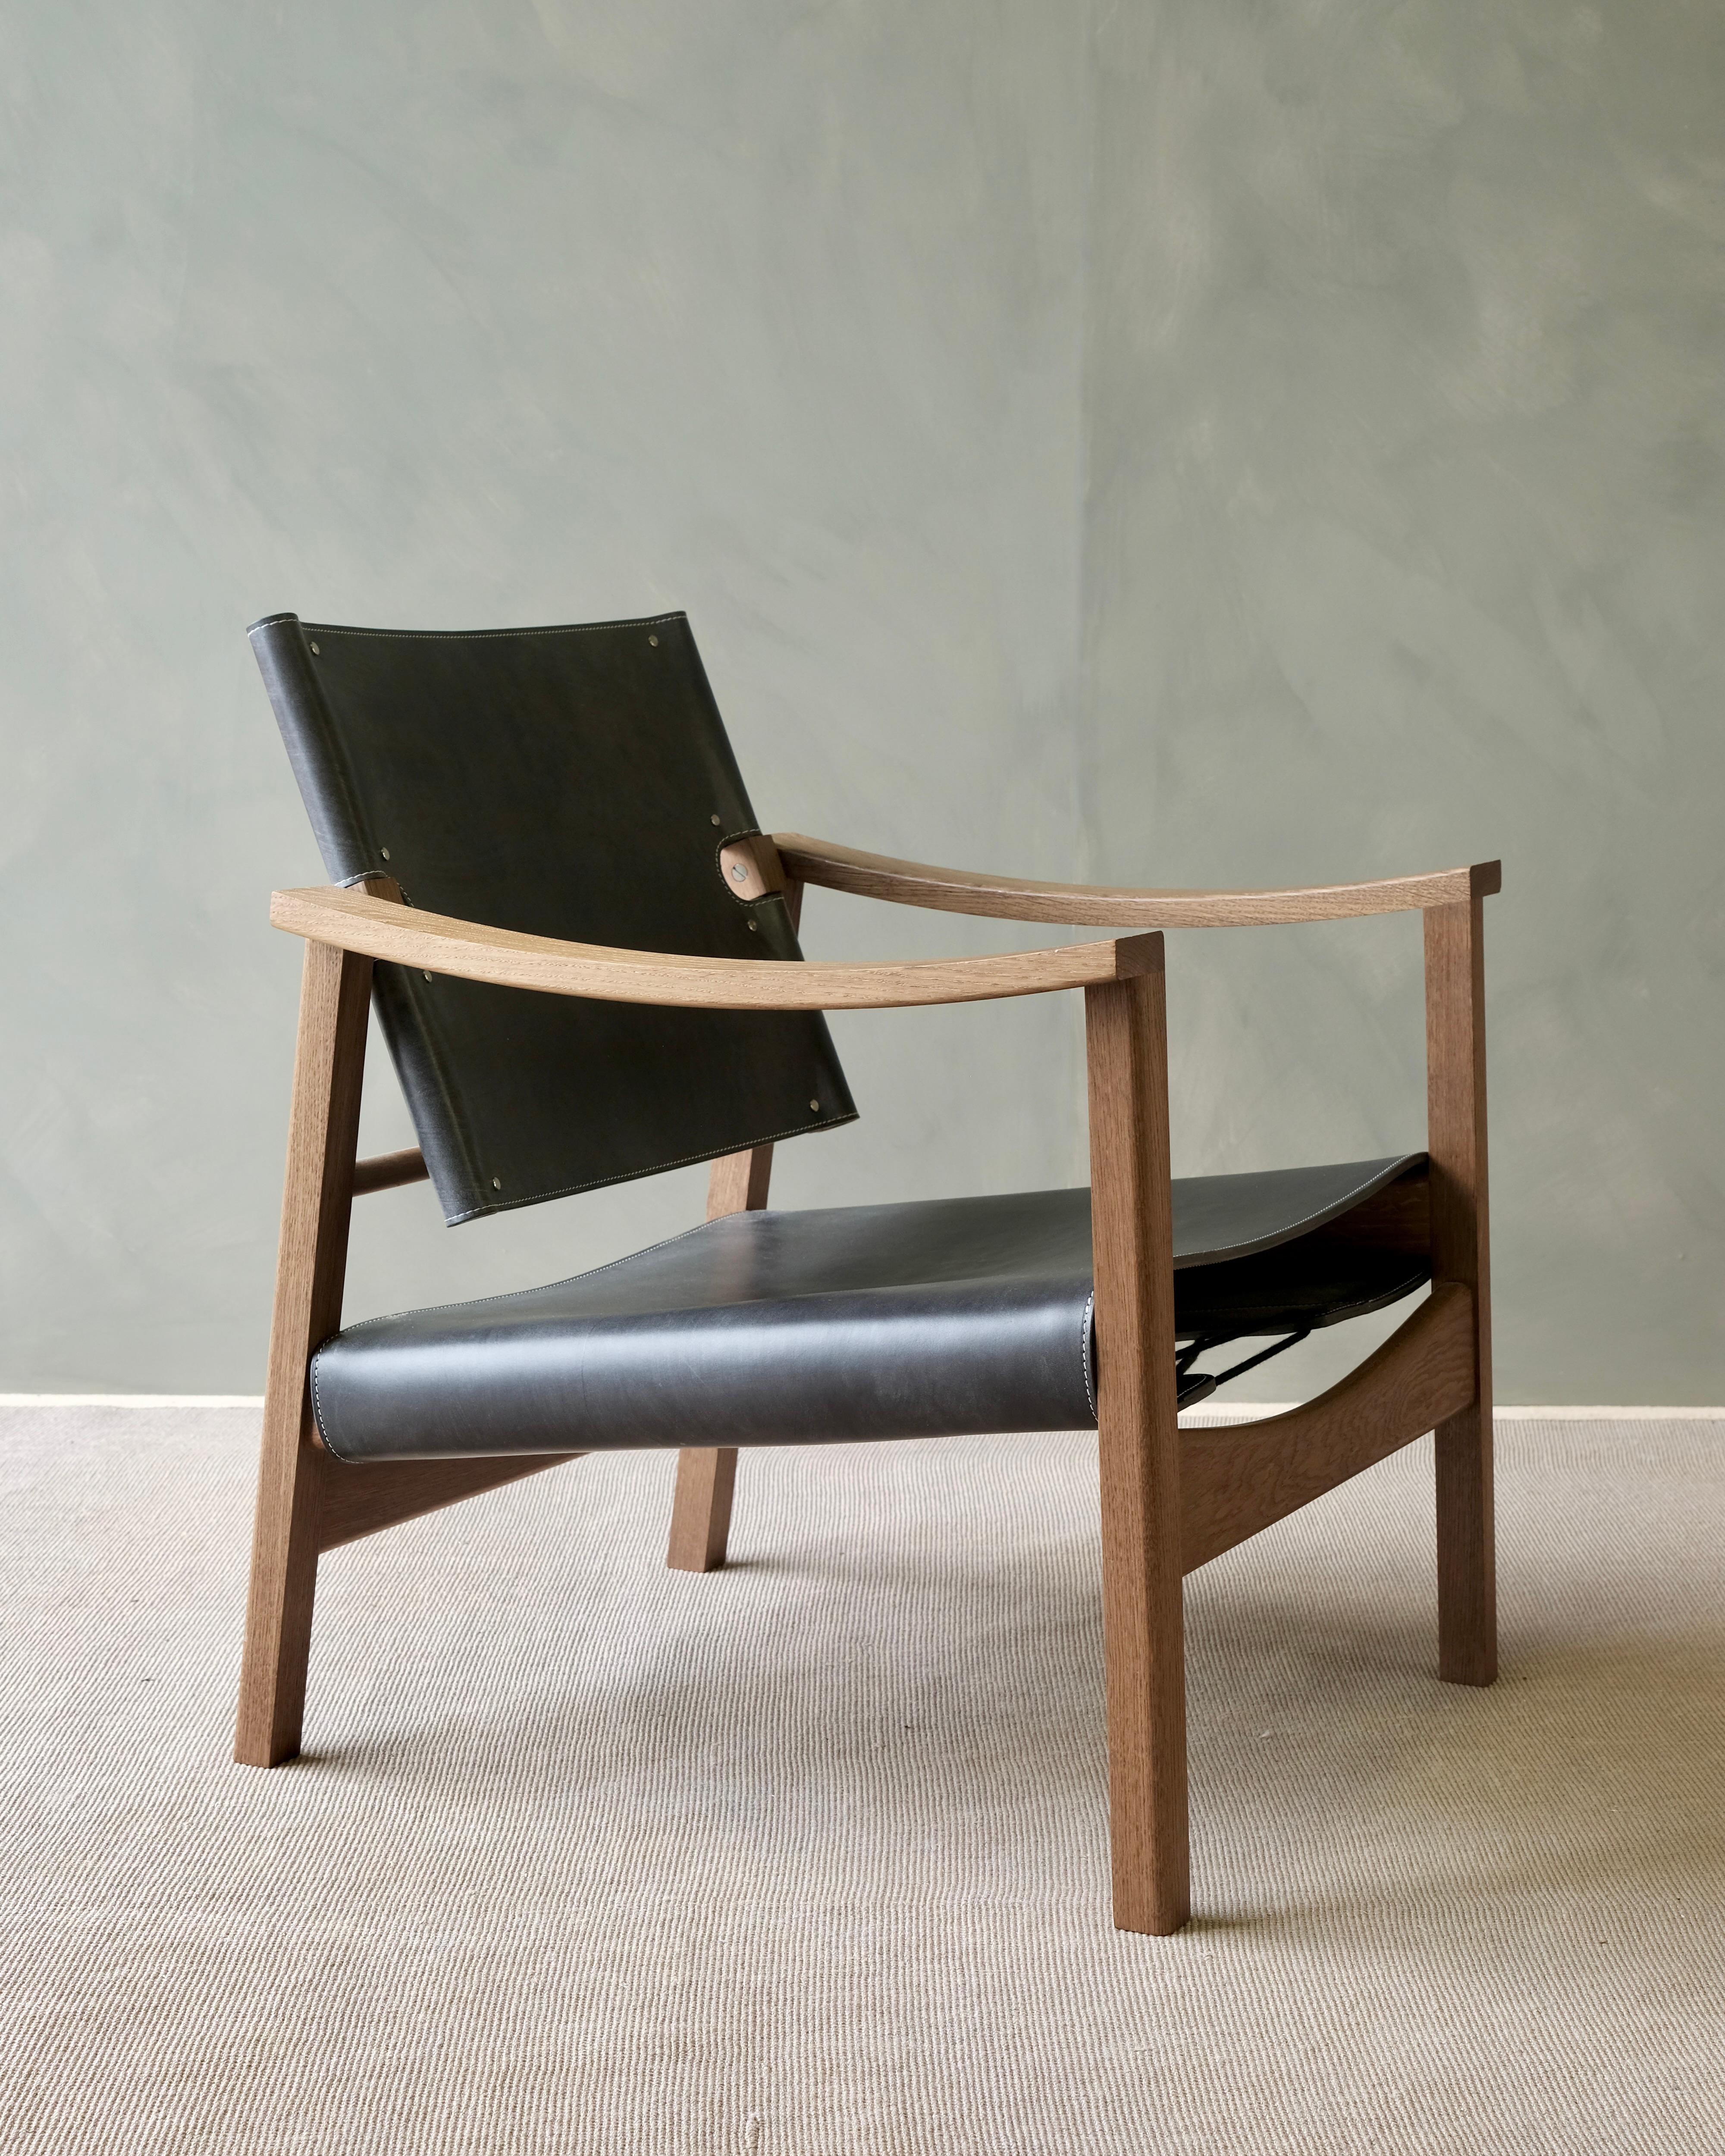 The Camber reading chair is refined and beautifully poised, with a gentle sculpted bow in the arm rests and slight angle on the subtly profiled legs. Using the finest oak bark bridle leathers and pit tanned leather cord from Britain's last remaining